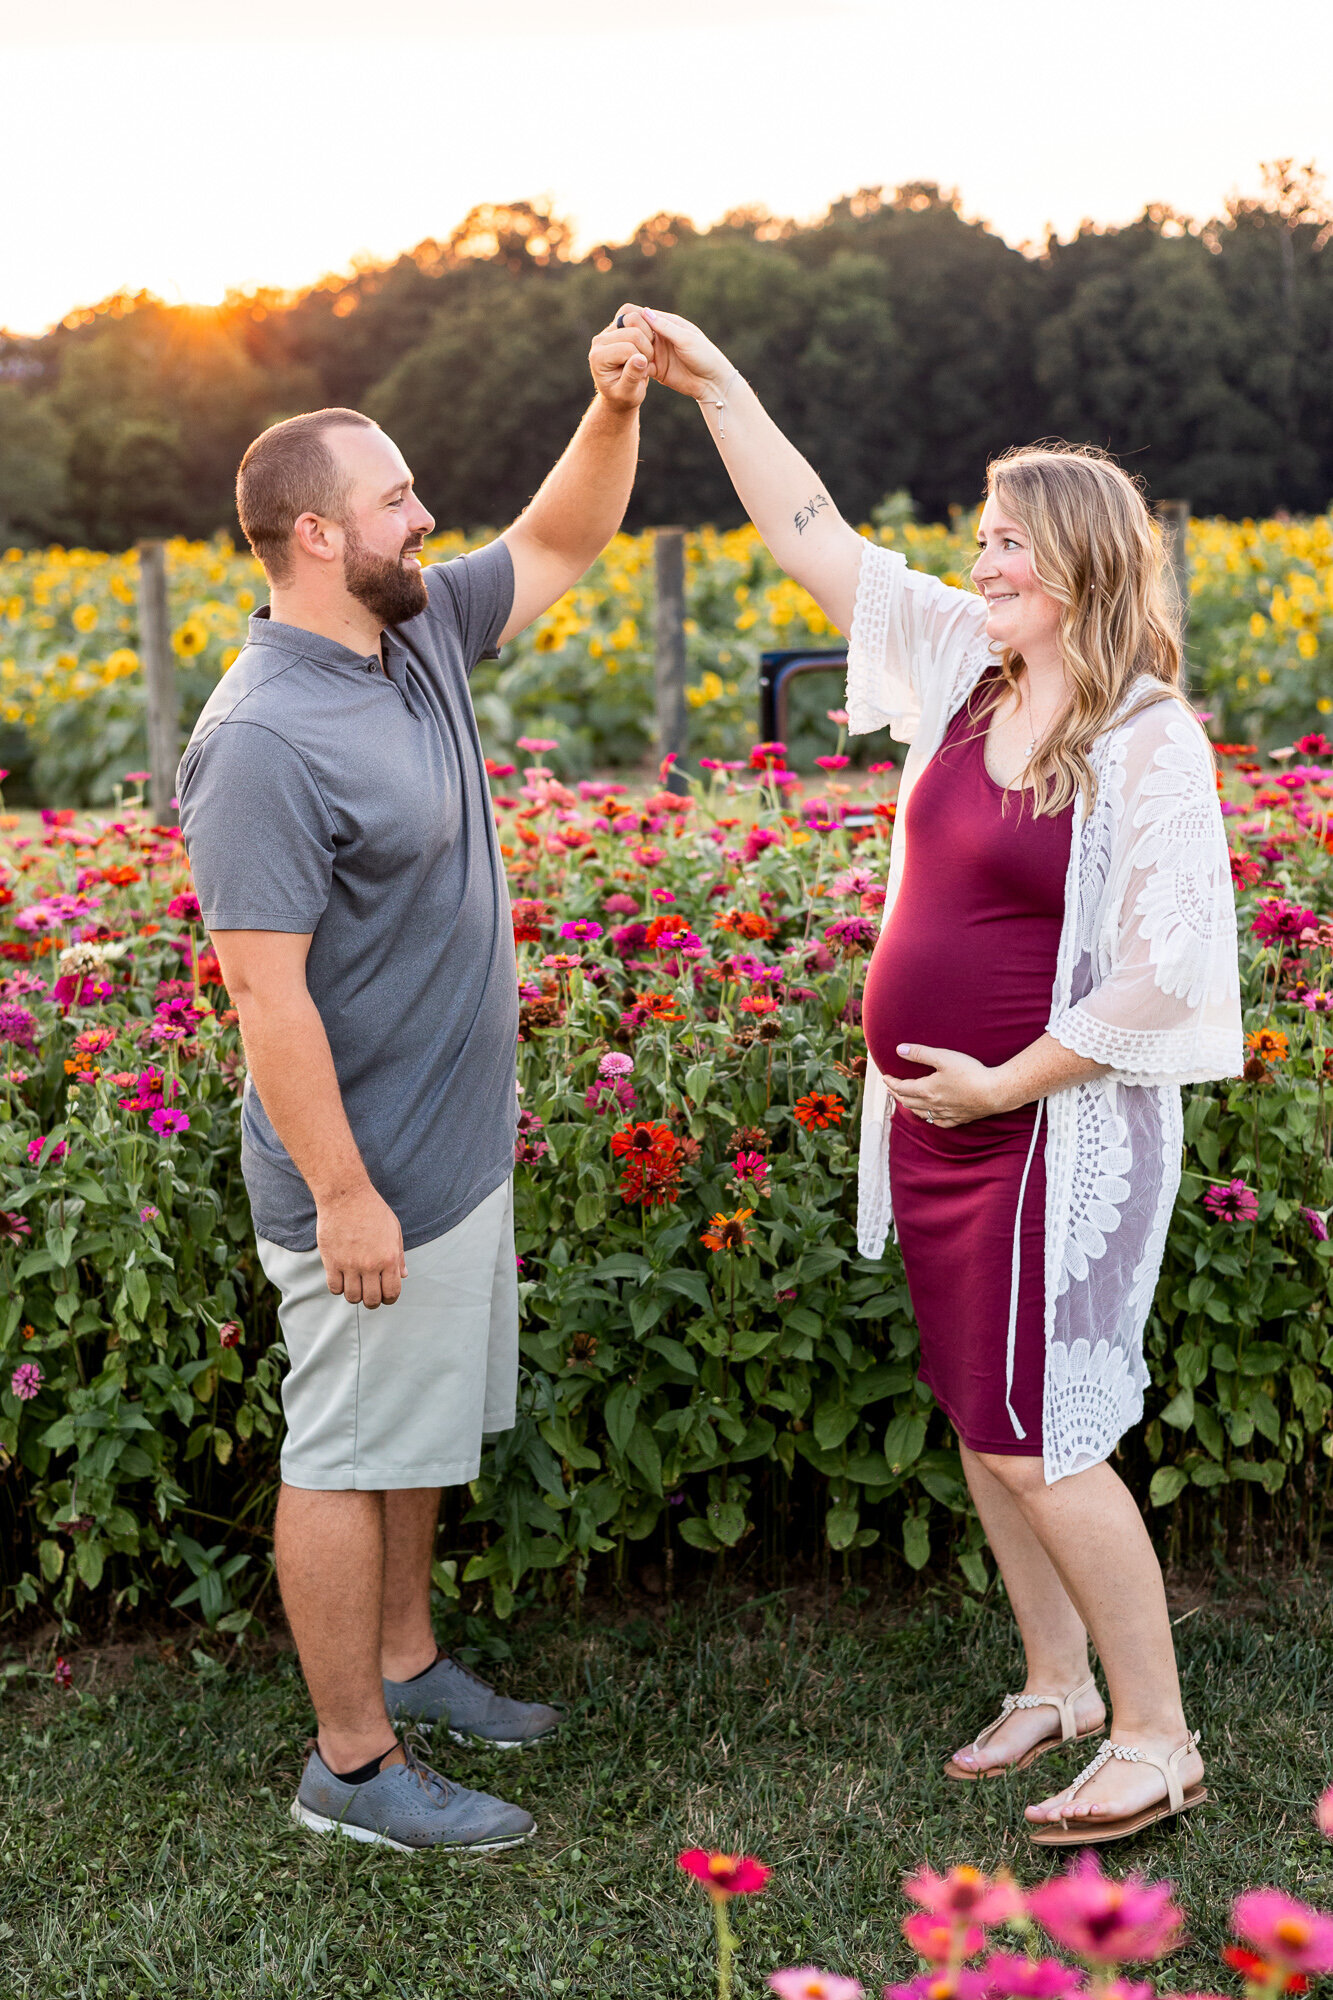 Outdoor-maternity-photography-sunflower-field-Georgetown-KY-photographer